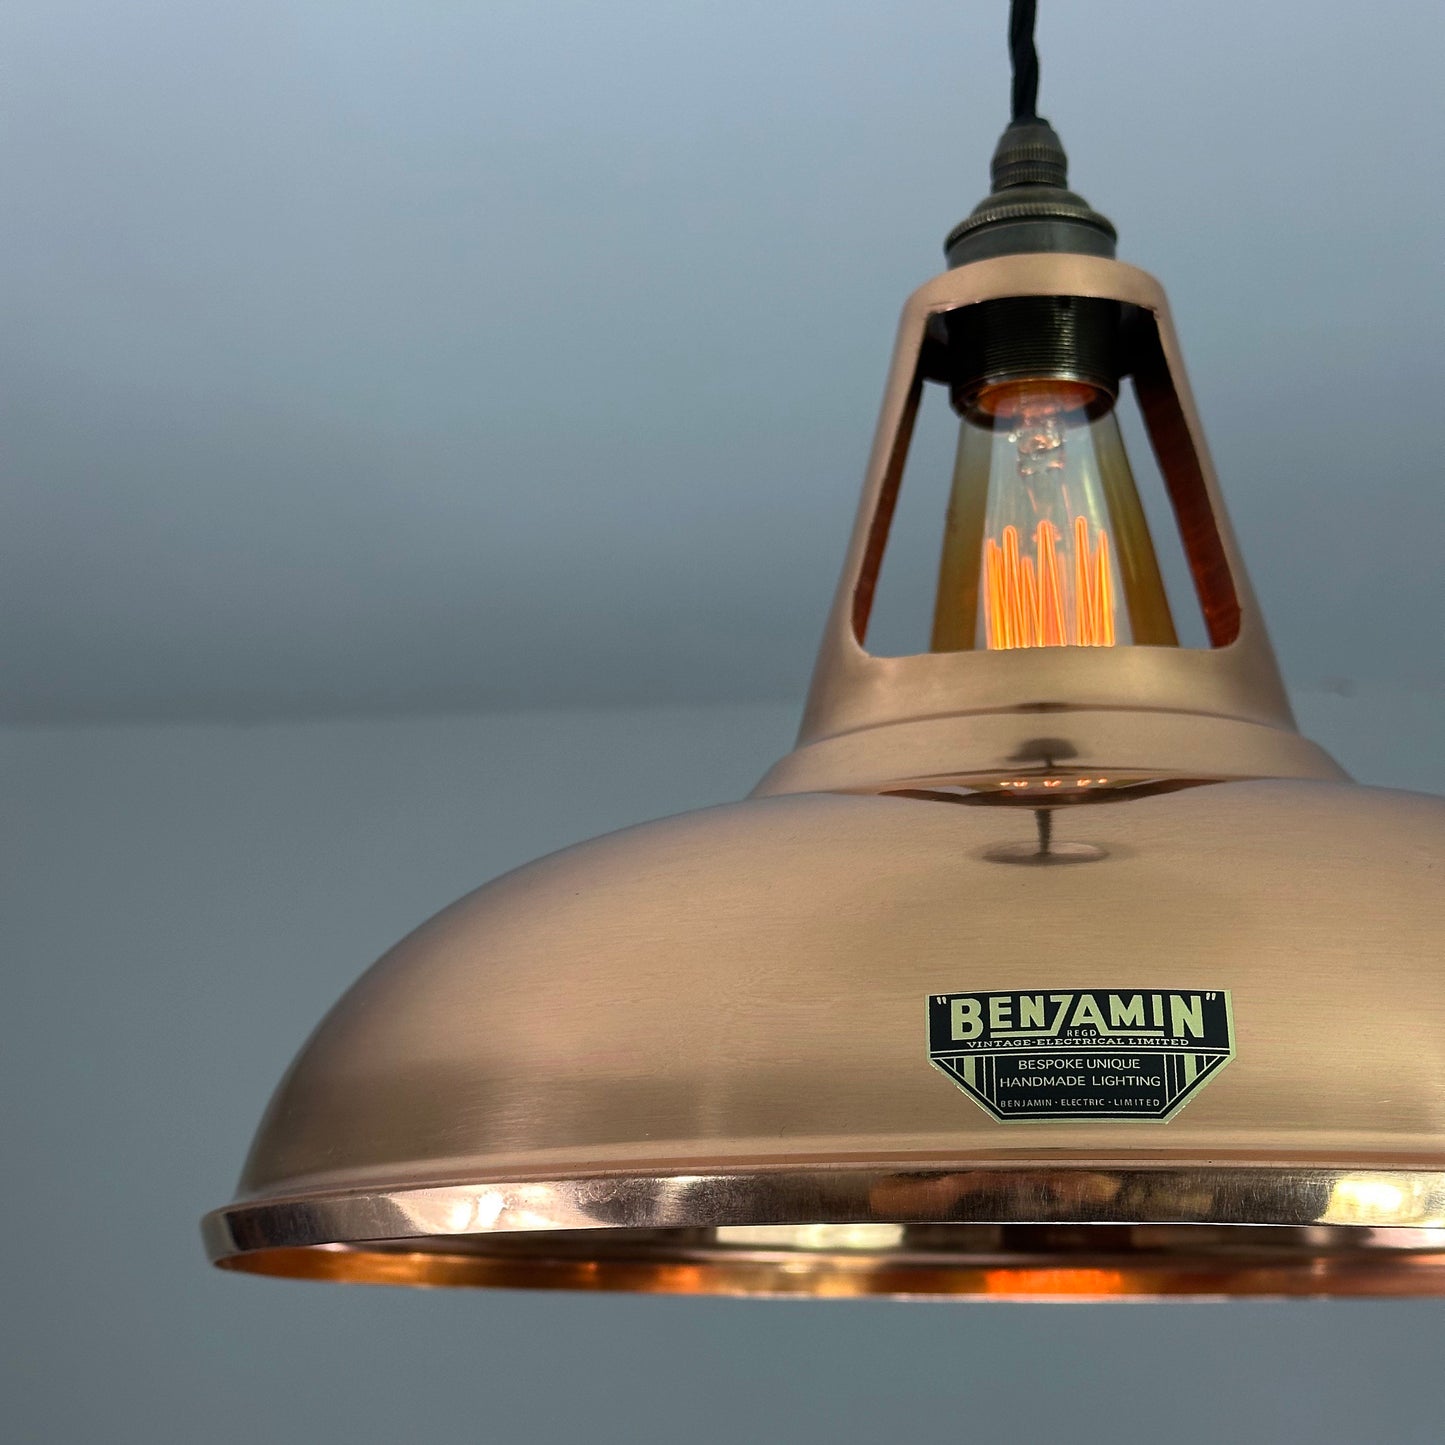 Cawston XL ~ Solid Copper Supersized Shade 1932 Design Pendant Set Light | Ceiling Dining Room | Kitchen Table | Large Coolie | 14 Inch